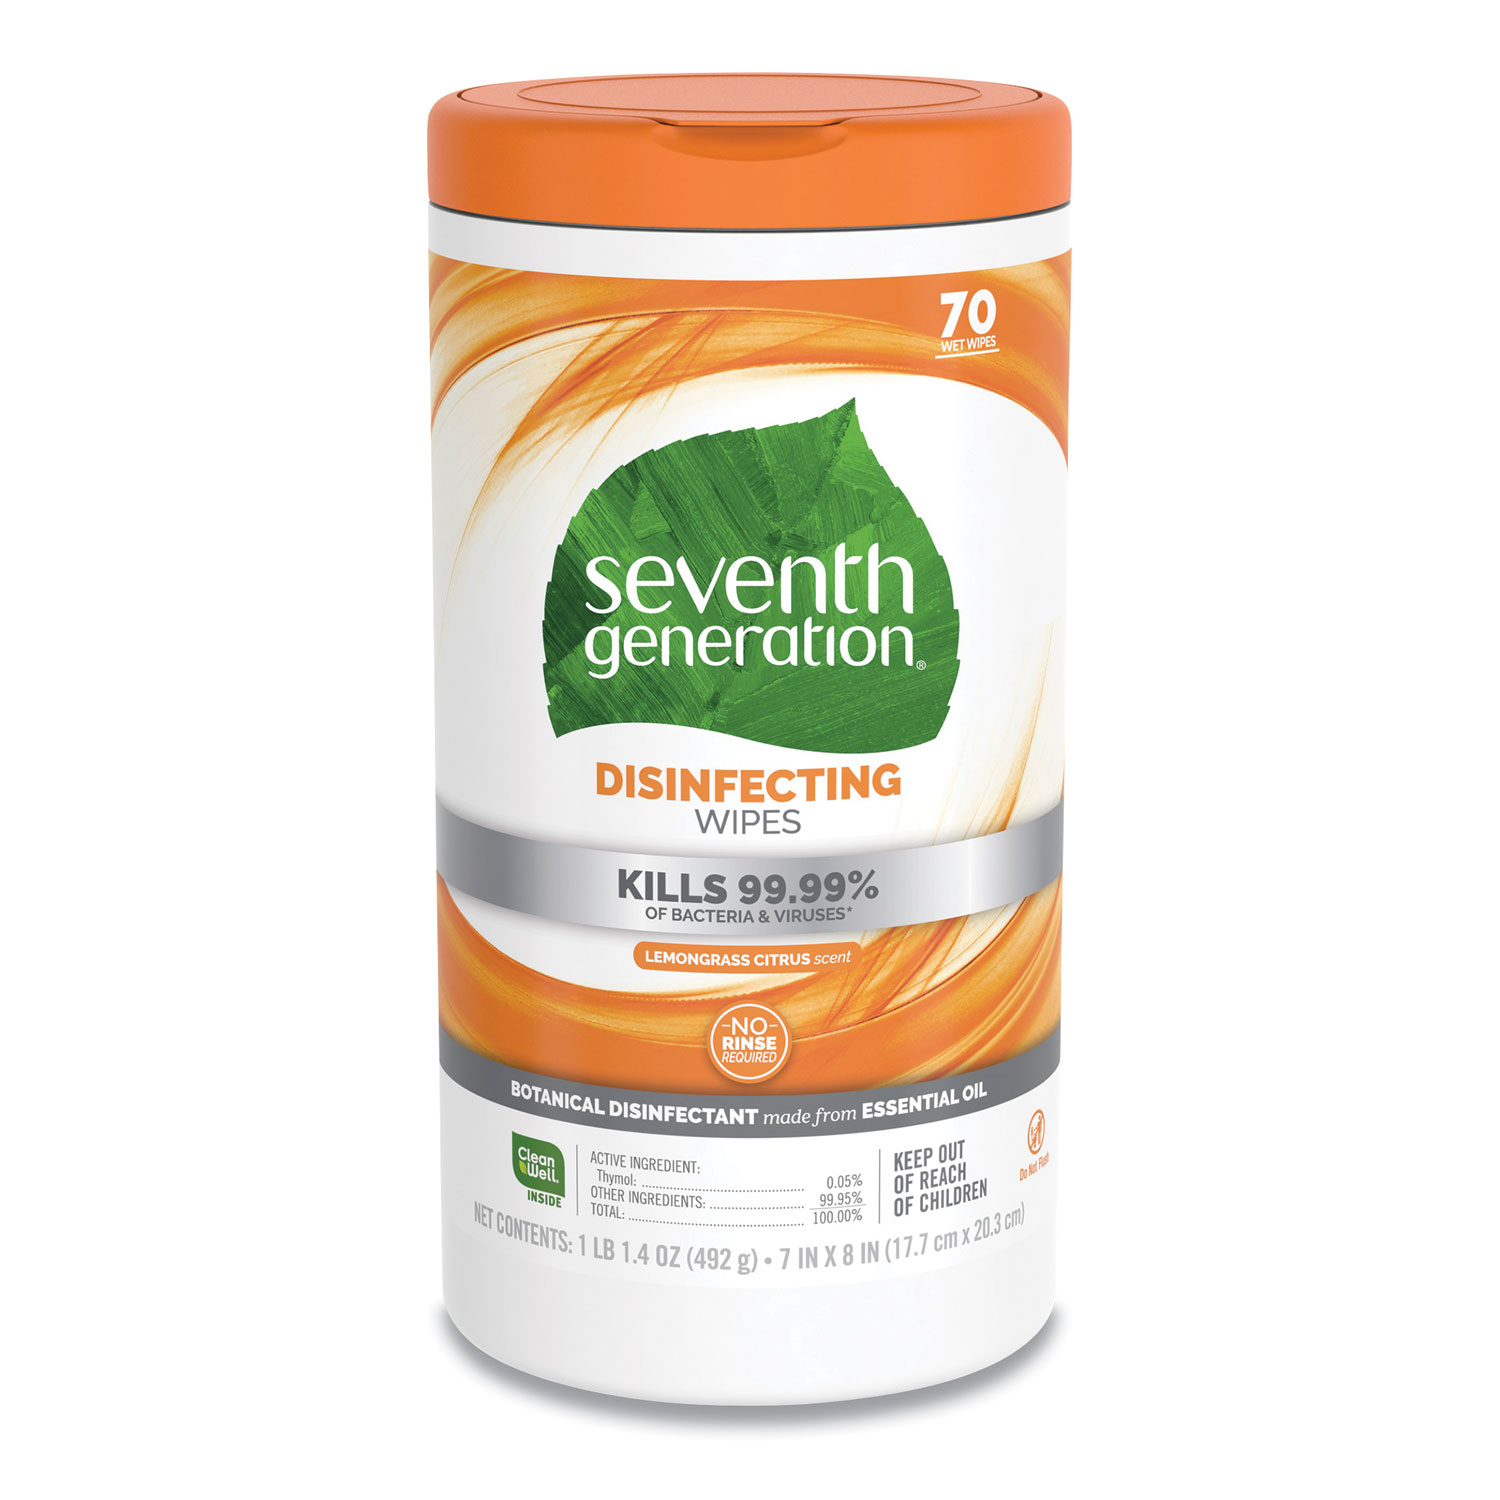  Seventh Generation SEV 22813 Botanical Disinfecting Wipes, 7 x 8, 70 Count, 6/Carton (SEV22813CT) 